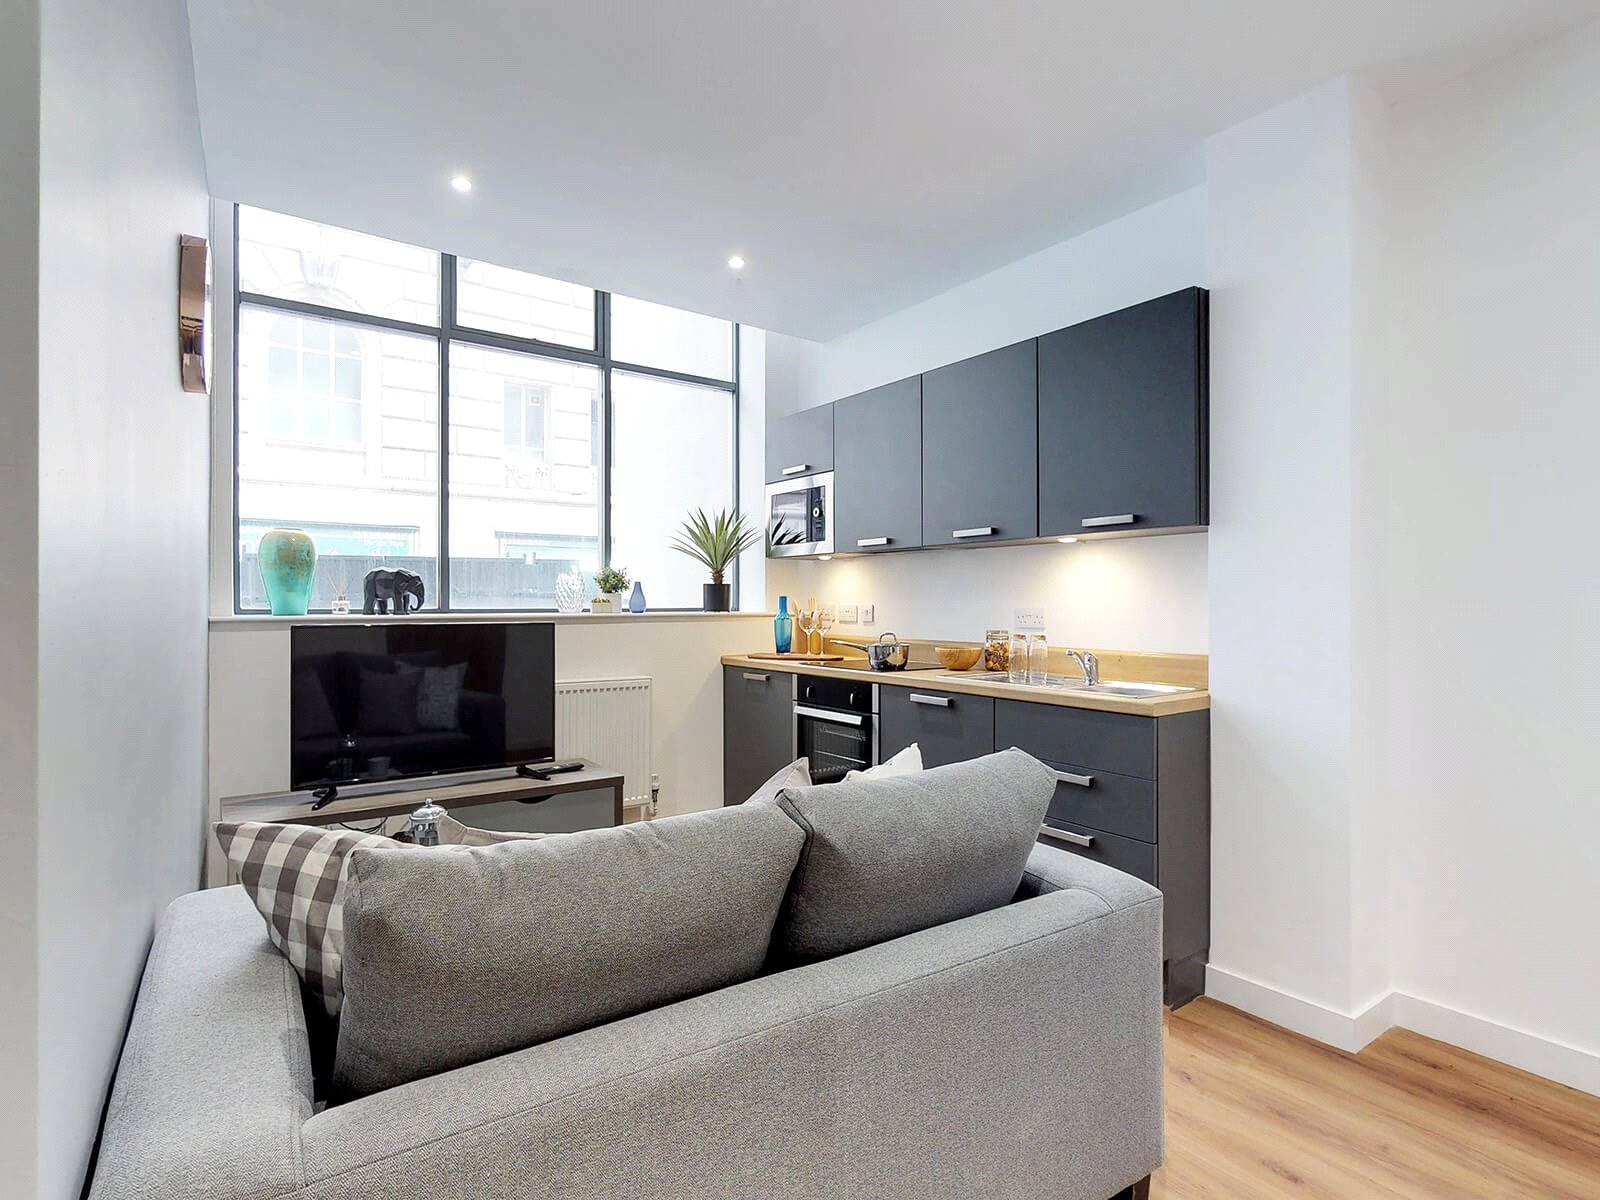 1 bed apartment  for rent in Liverpool. From YPP - Sheffield